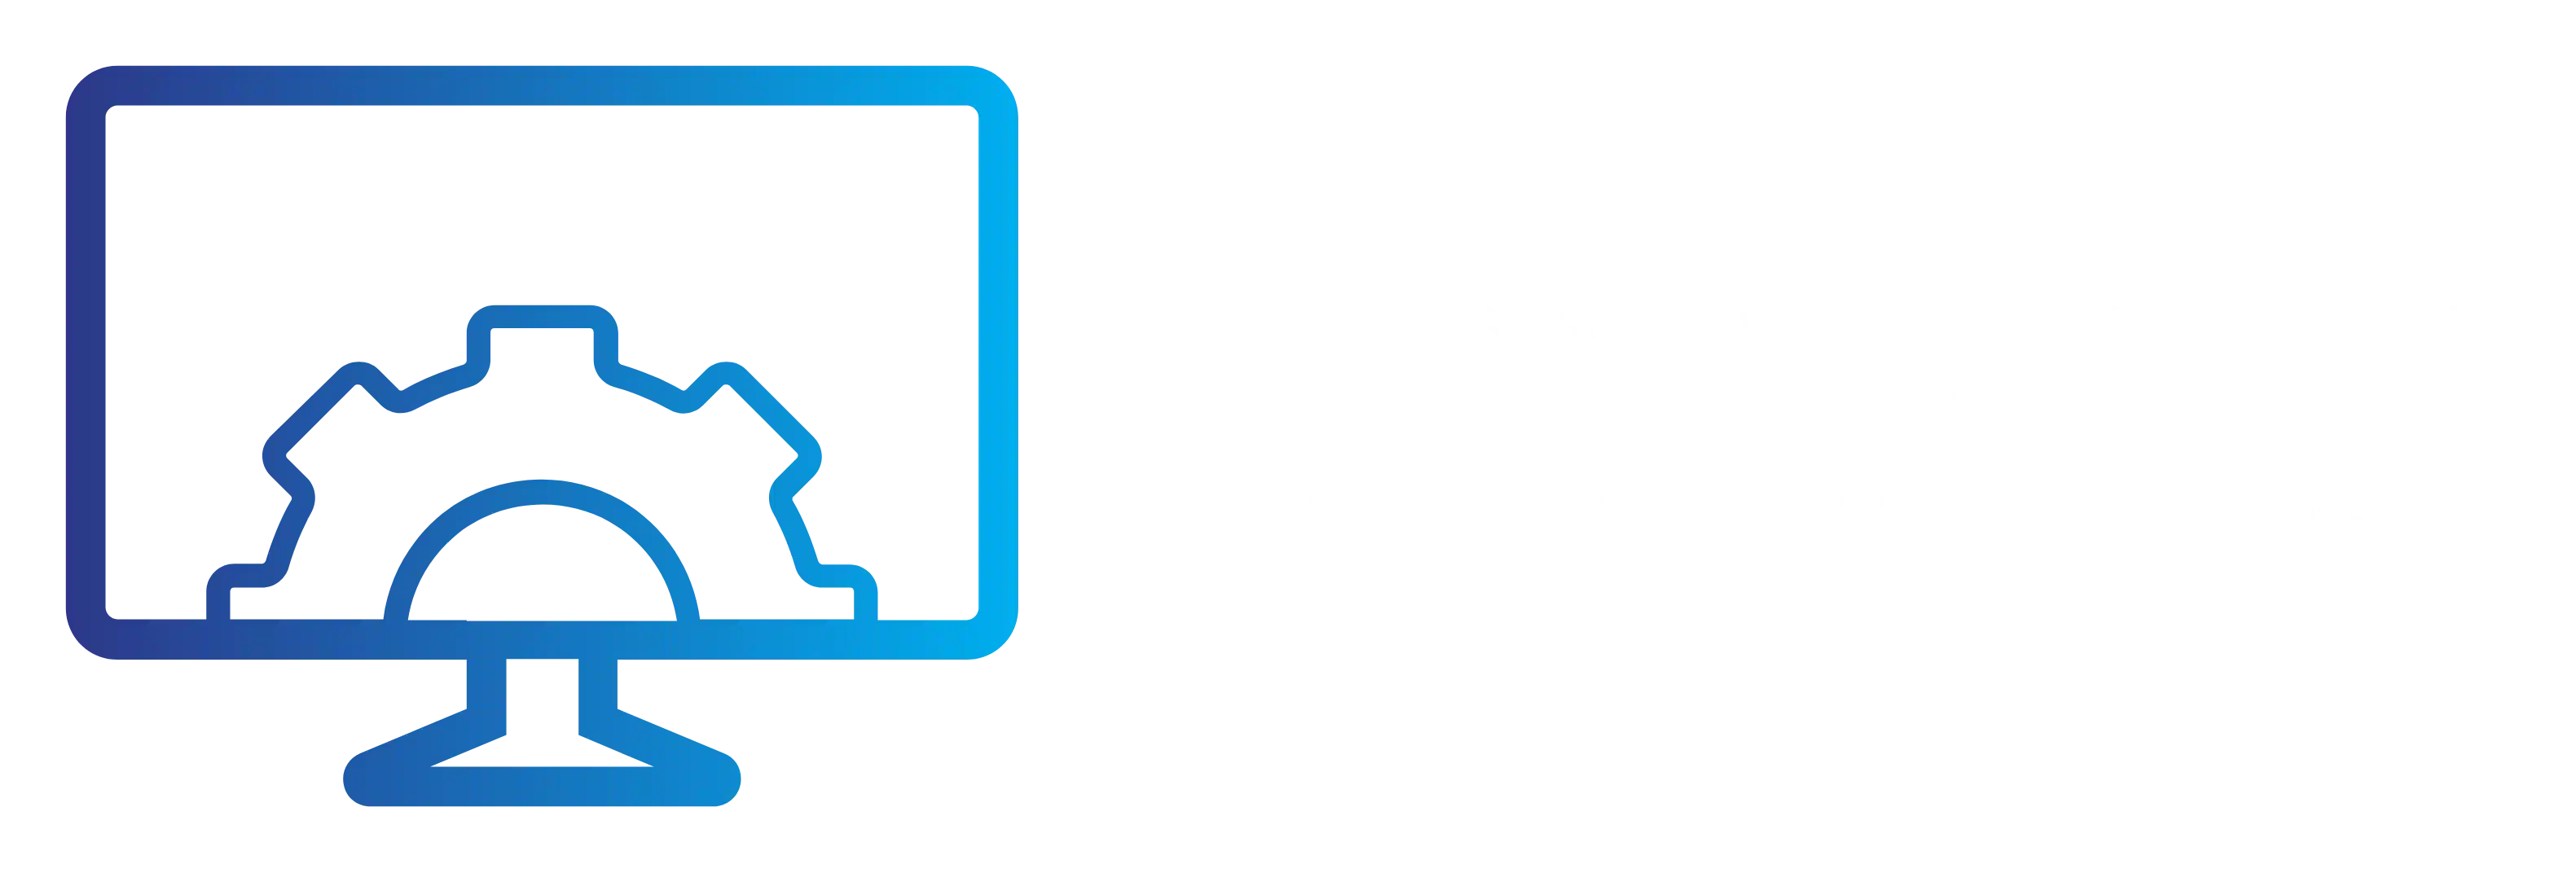 TTOY Digital - Digital Solutions for small Business